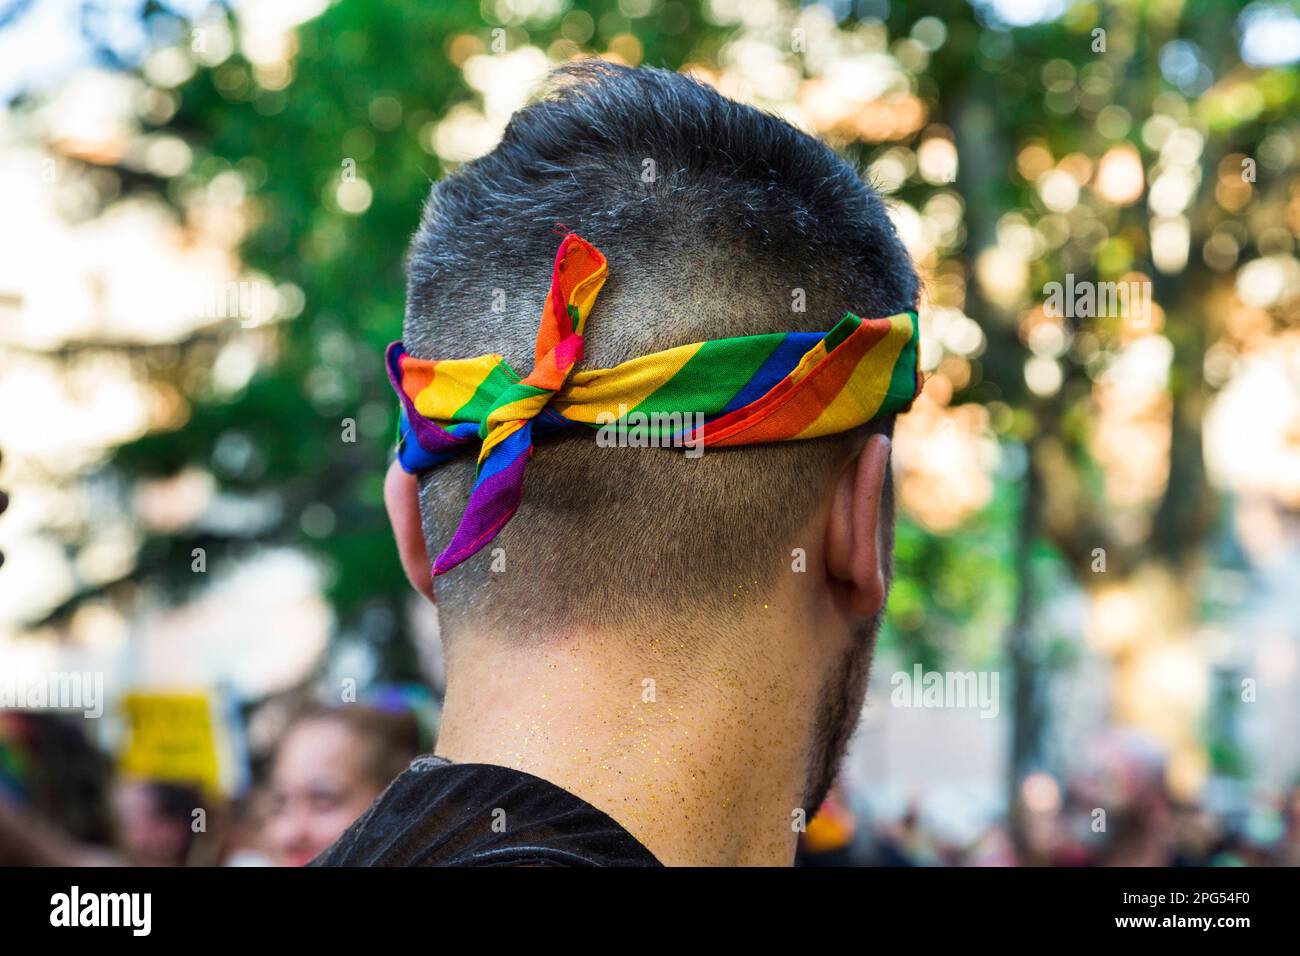 Man with LGBT headscarf. Pride festival. Fighting for equal rights. Freedom and respect Stock Photo